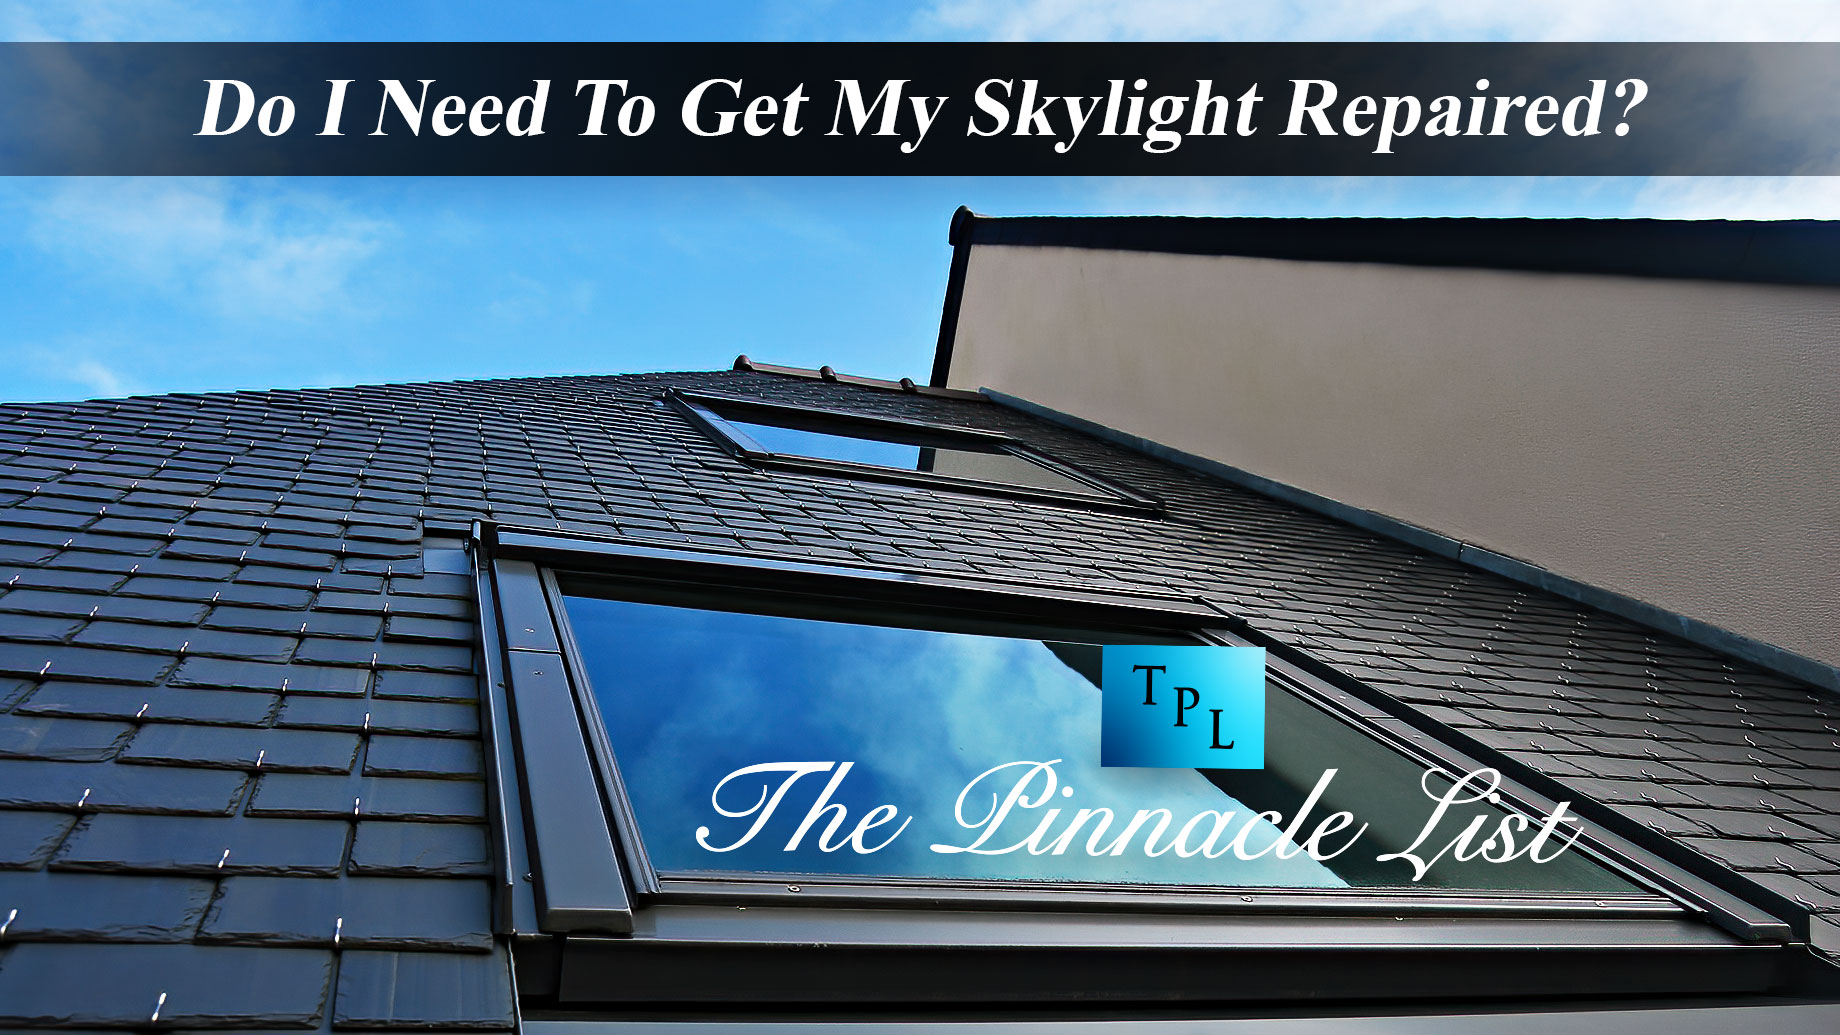 Do I Need To Get My Skylight Repaired?